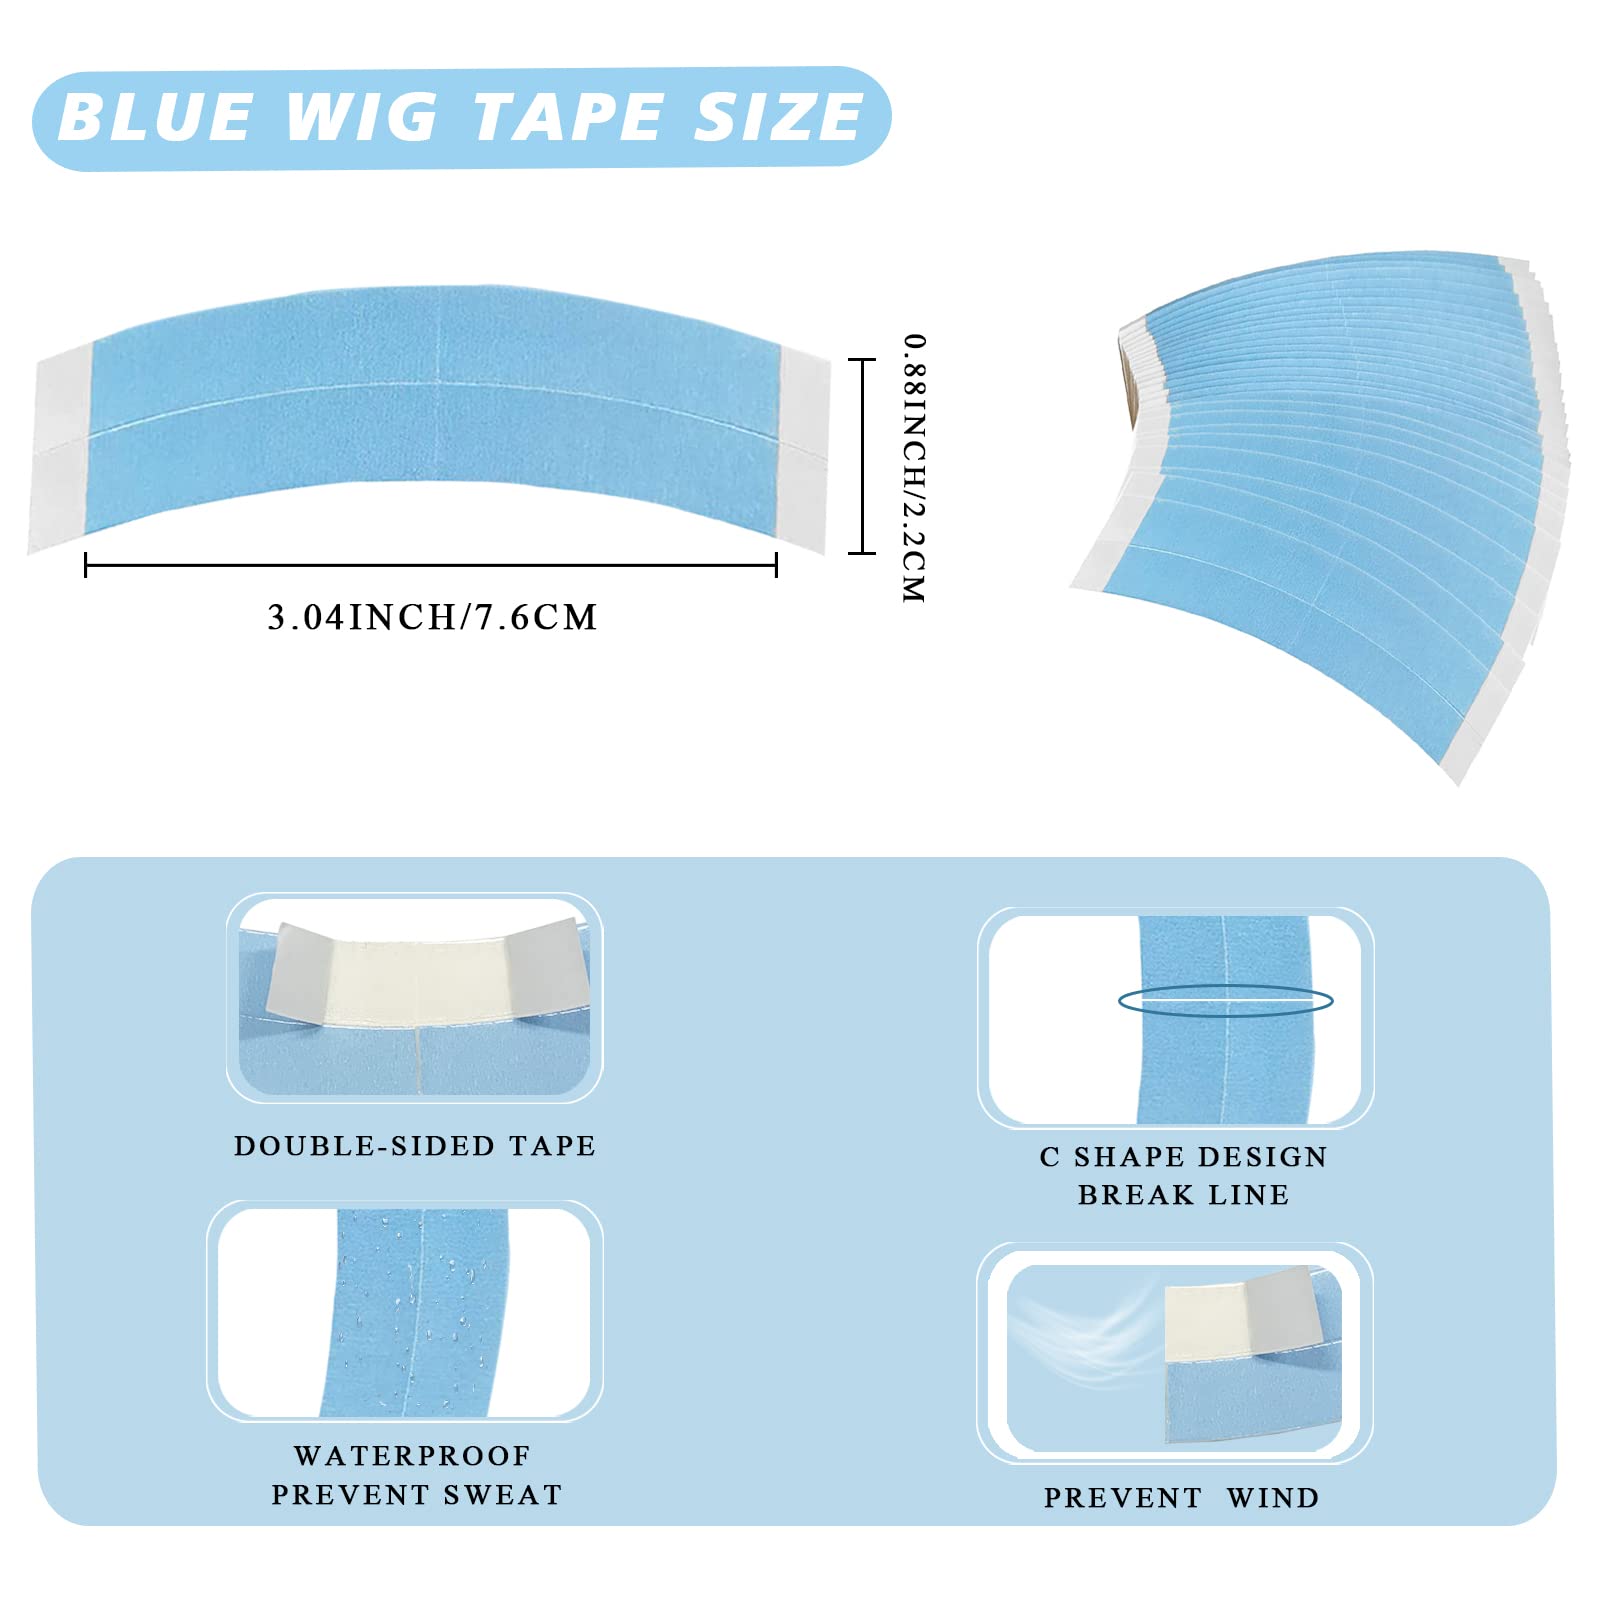 36pcs Wig Tape for Lace Wigs Double Sided Waterproof Lace Wigs Adhesive